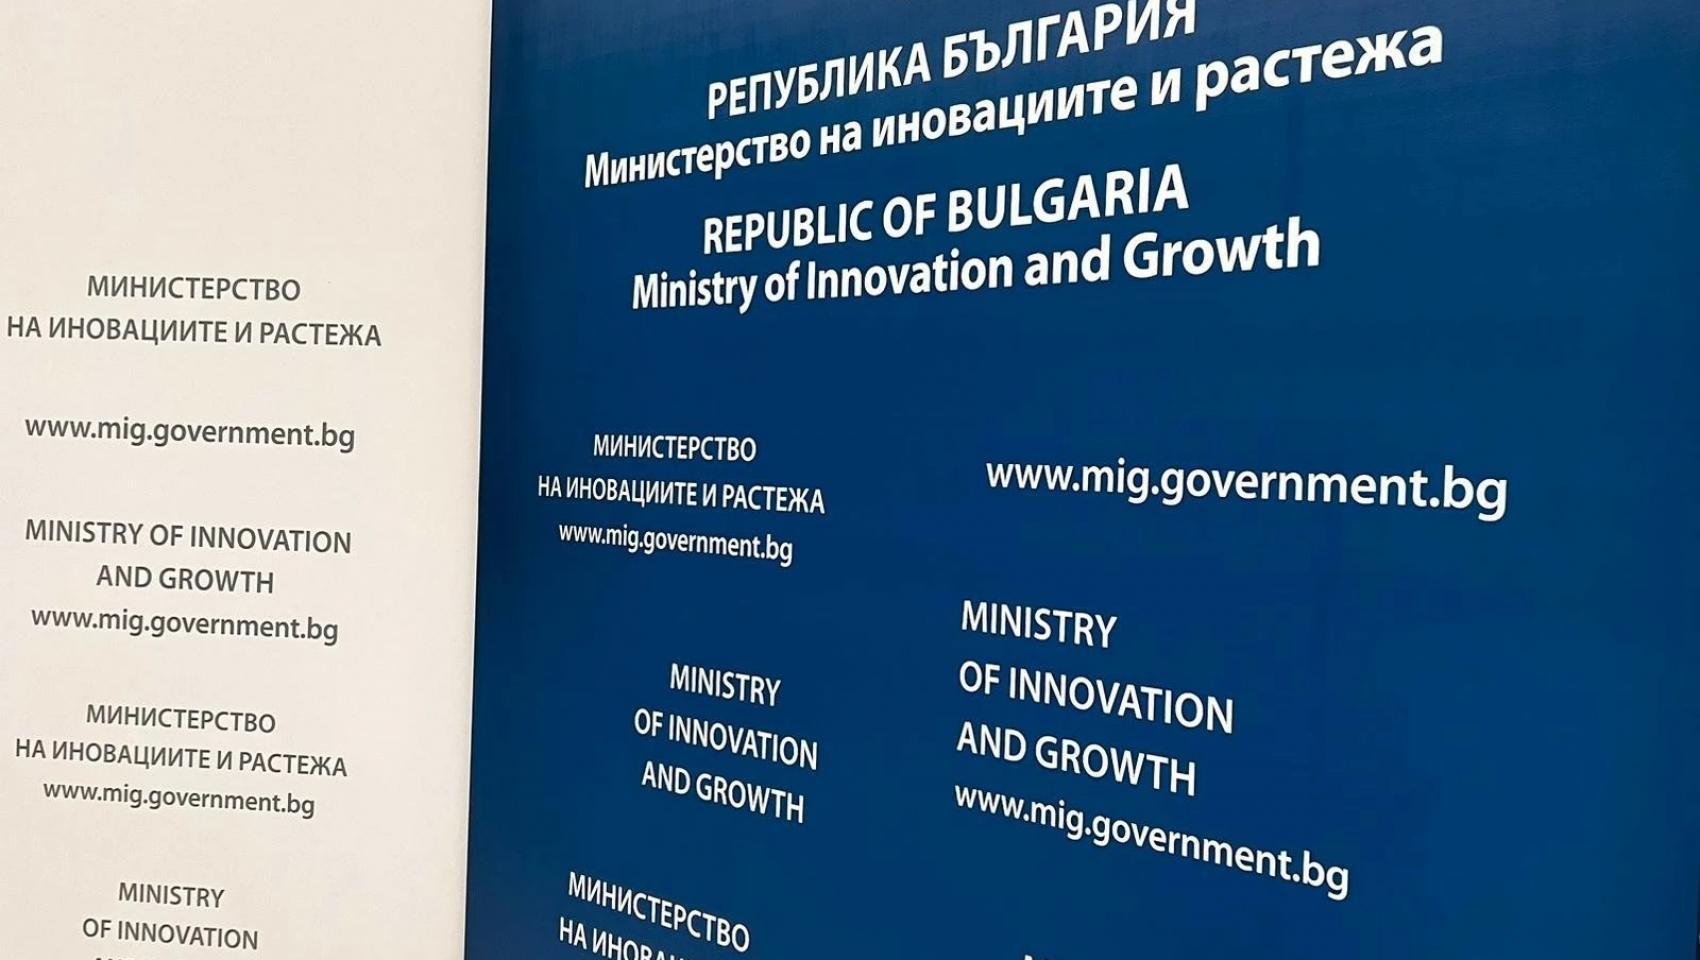 The Ministry of Innovation and Growth concluded 744 contracts (out